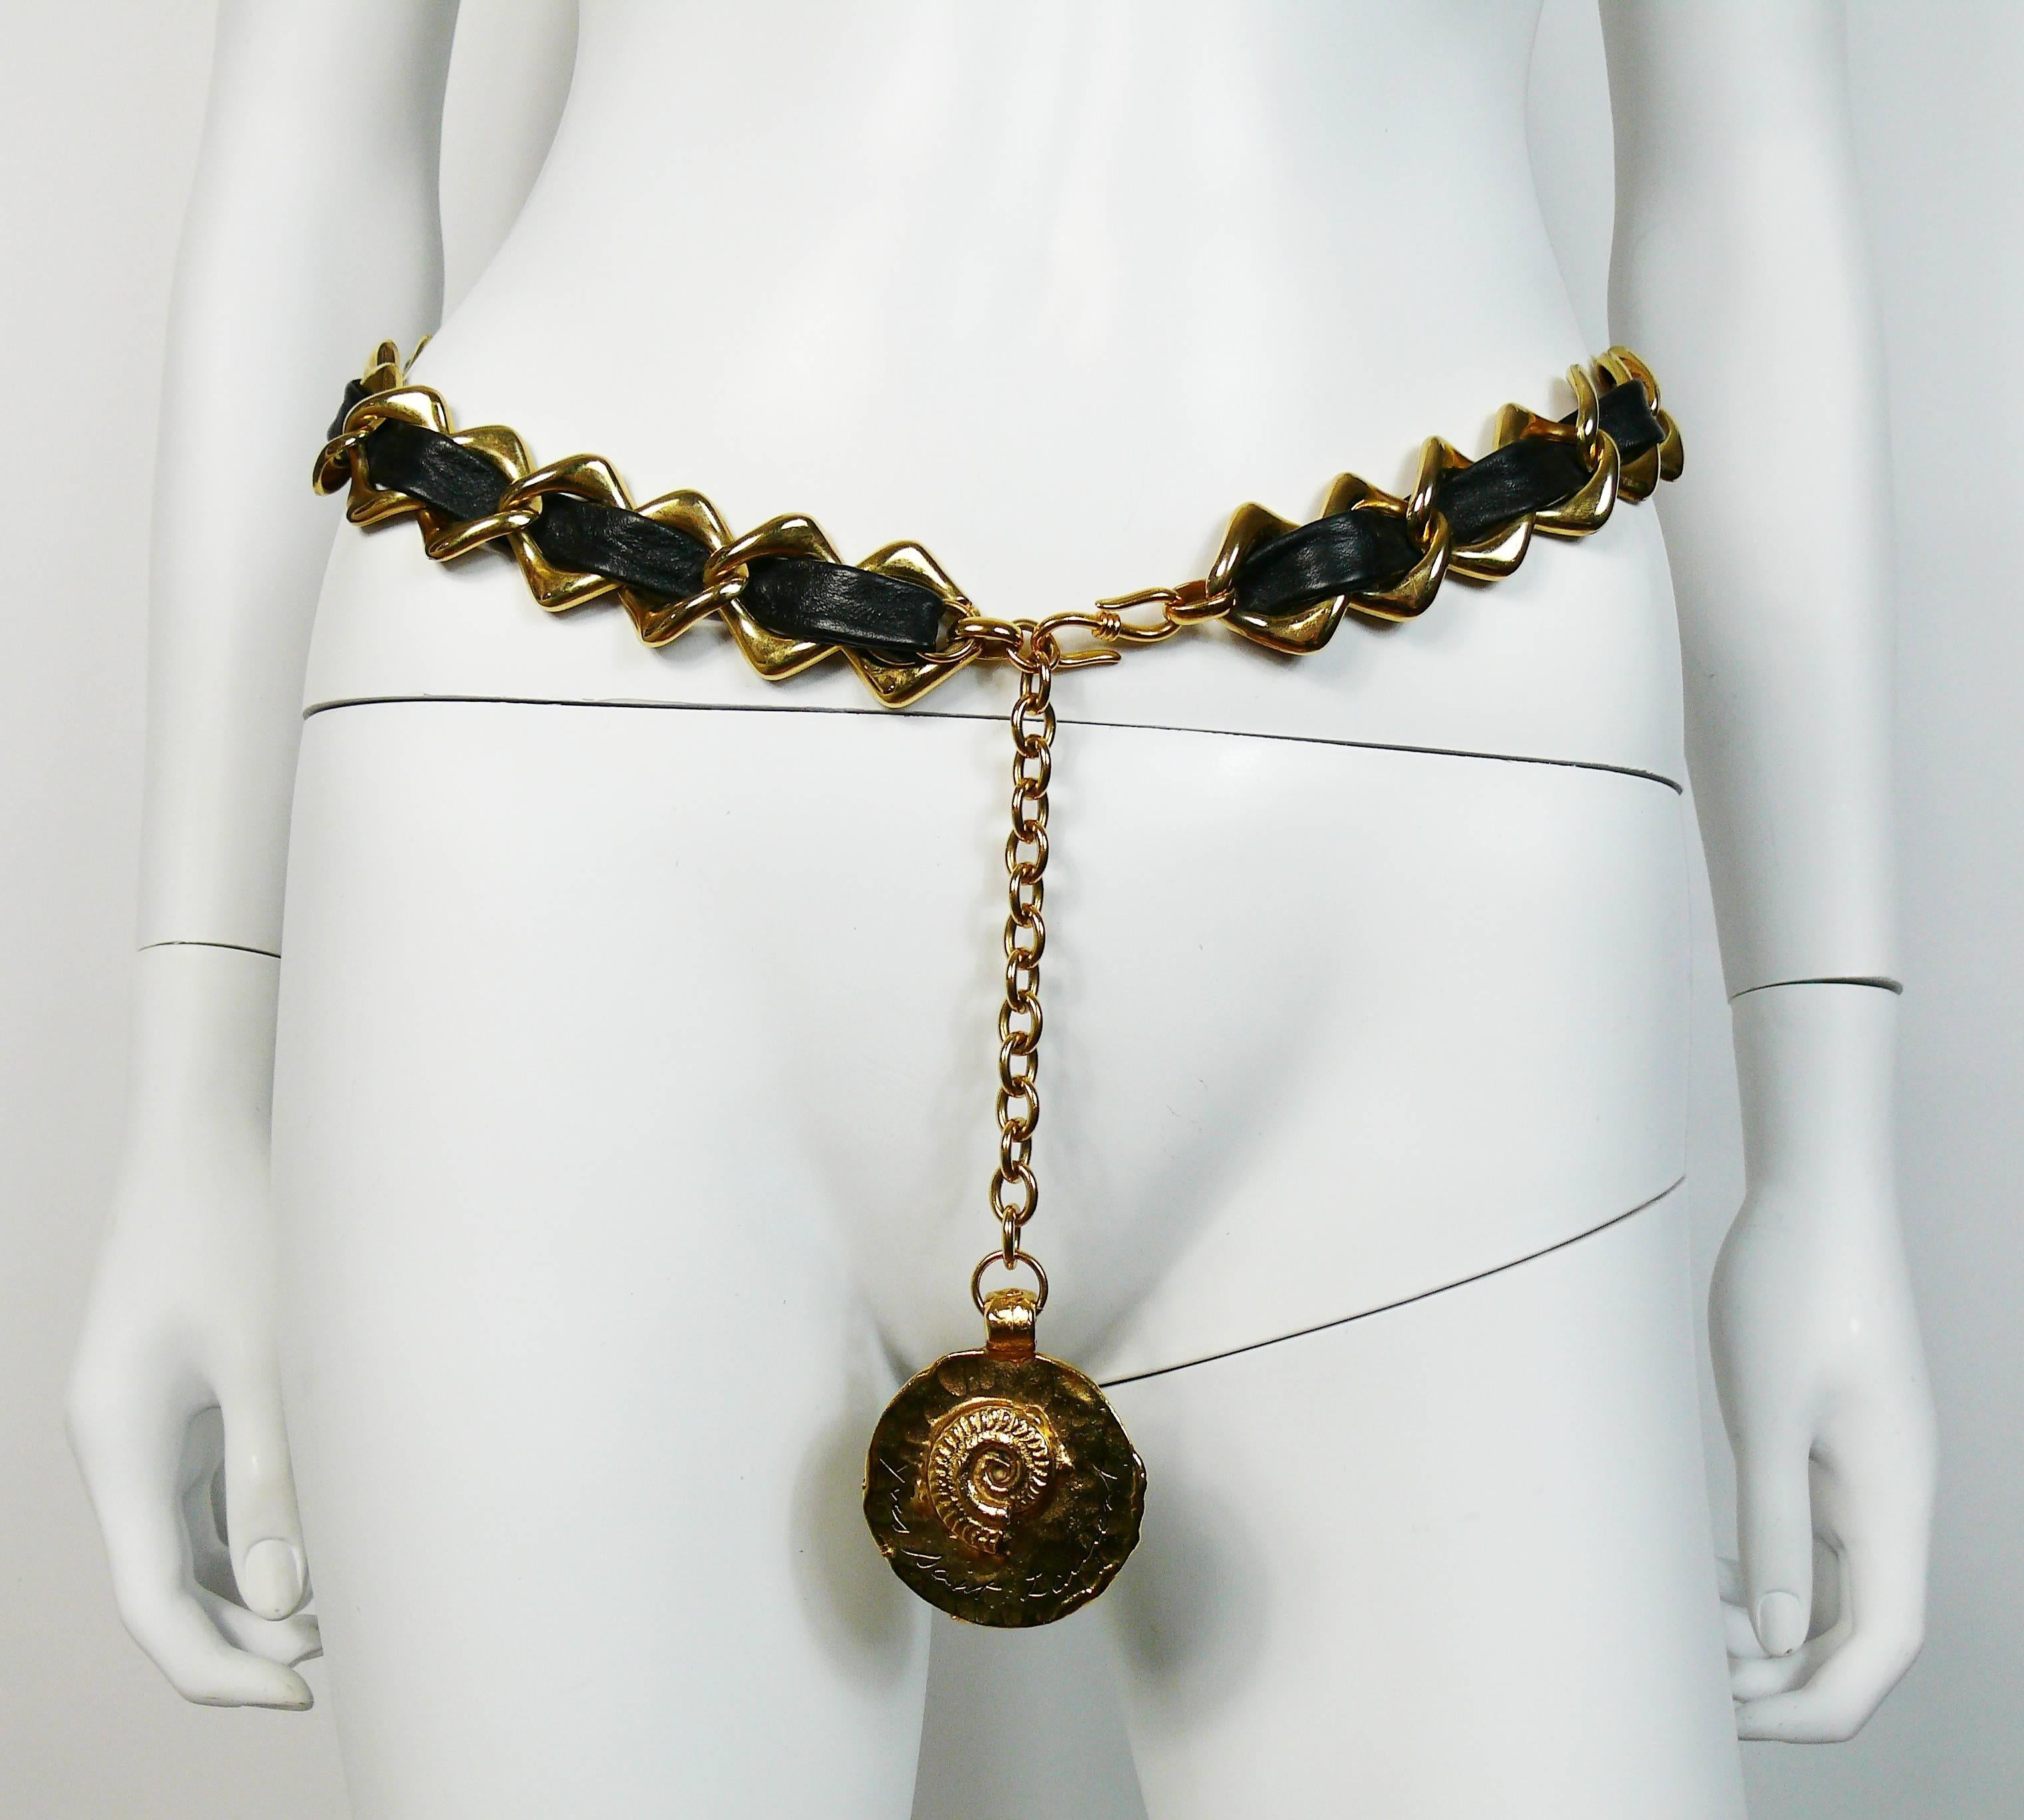 YVES SAINT LAURENT vintage interwoven black leather chain belt featuring a massive shell fossil medallion pendant.

May be worn as a necklace.

Hook closure.

Embossed YVES SAINT LAURENT.

Indicative measurements : total length (including coin and